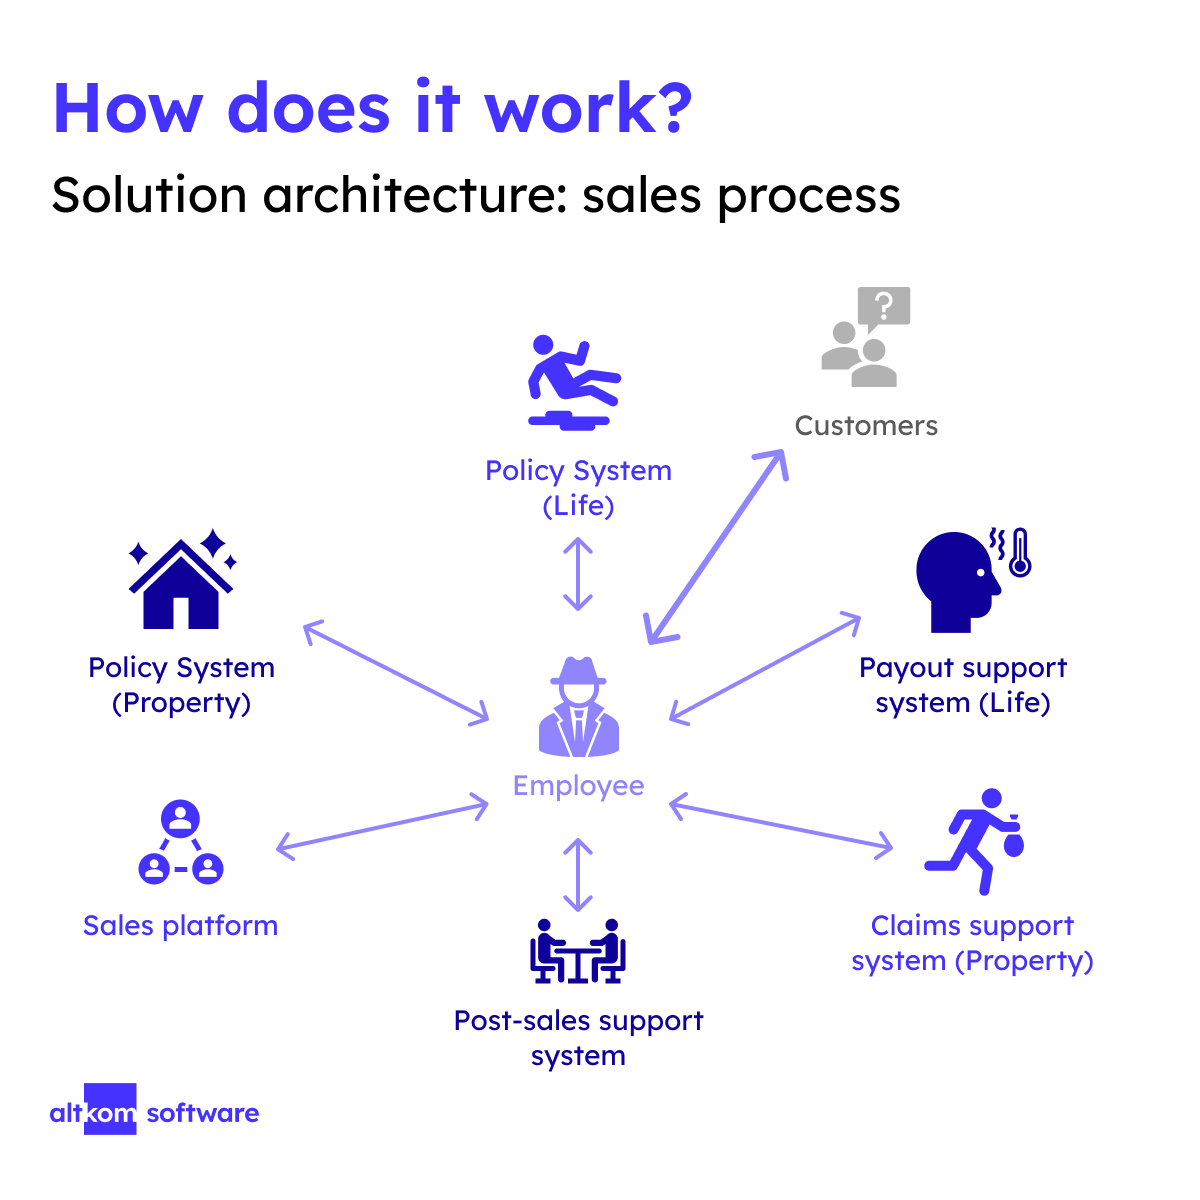 Ifographic showing sales process in solution architecture. 